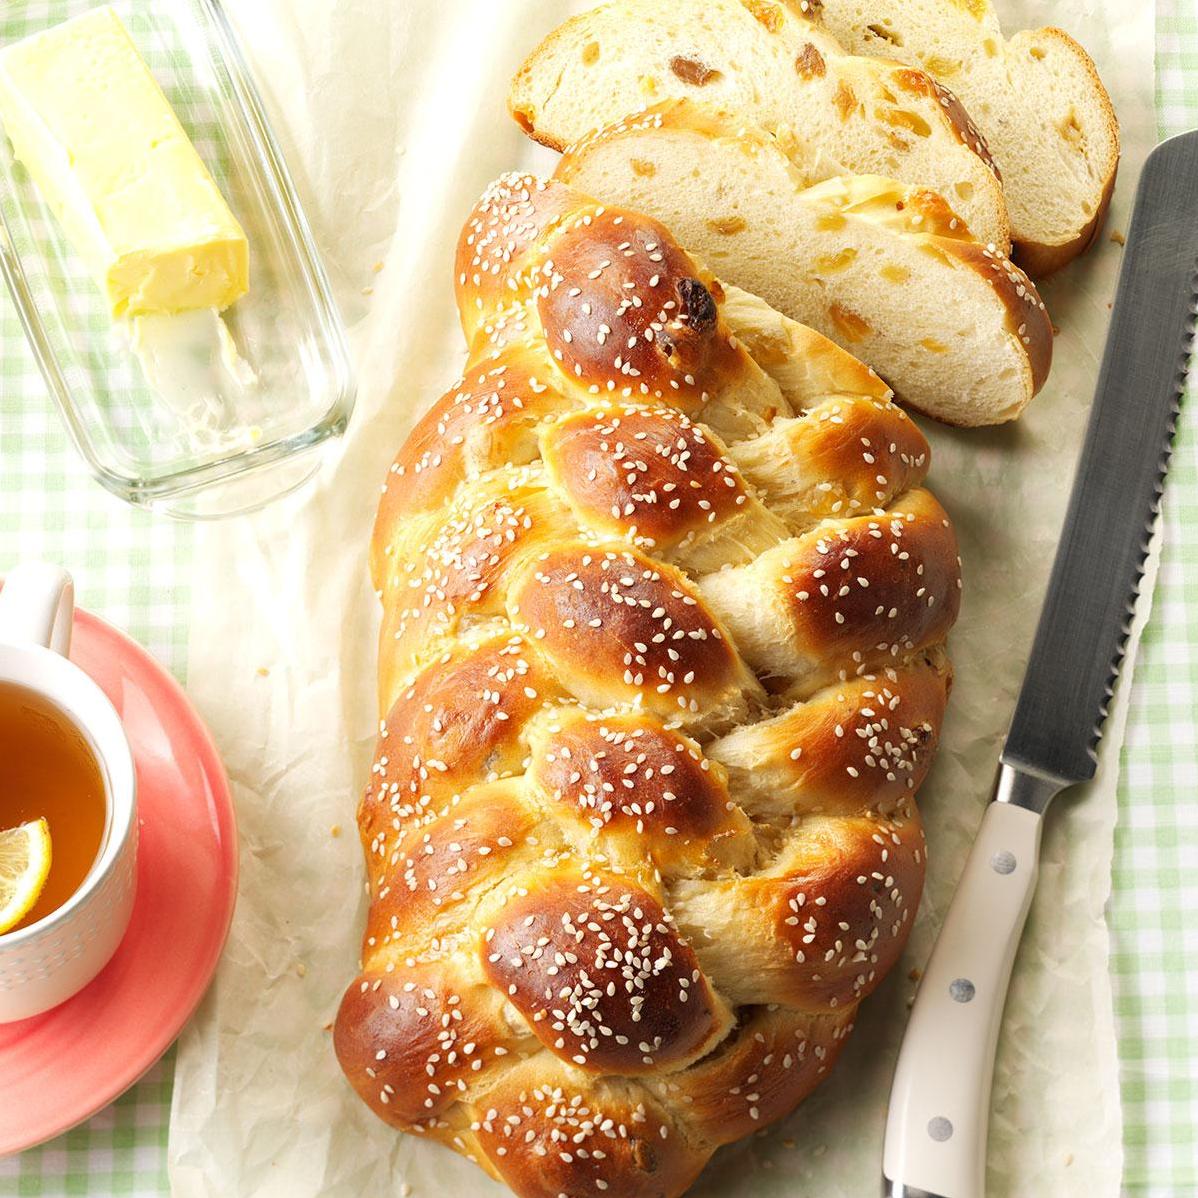  Golden and fluffy Honey Challah Rolls fresh out of the oven!